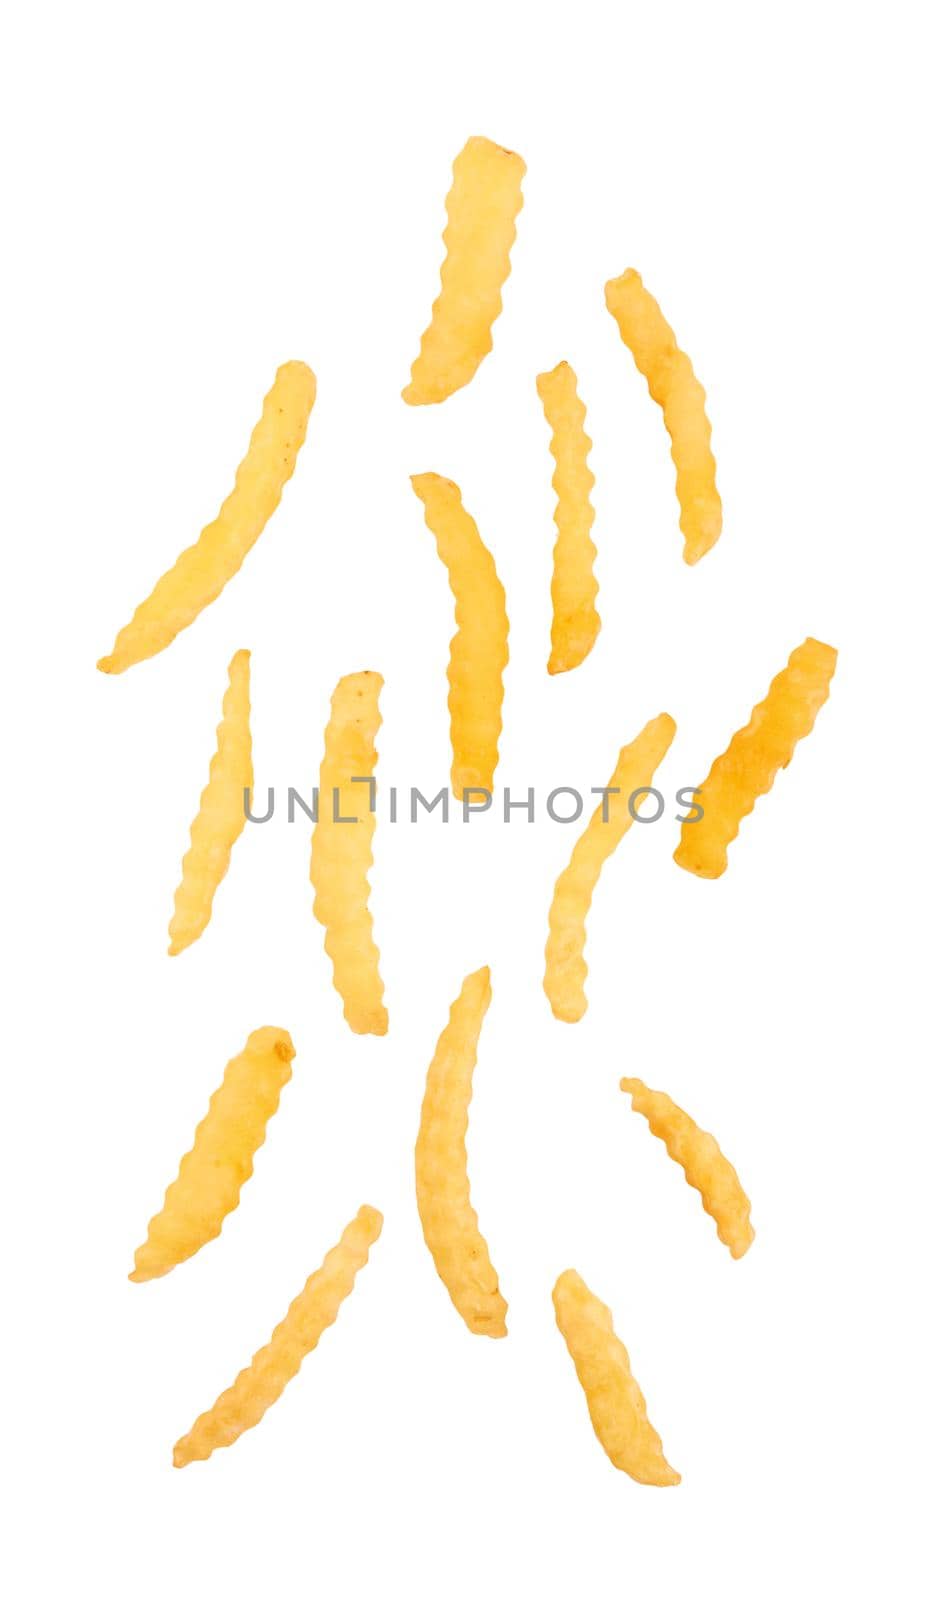 French fries on white by pioneer111